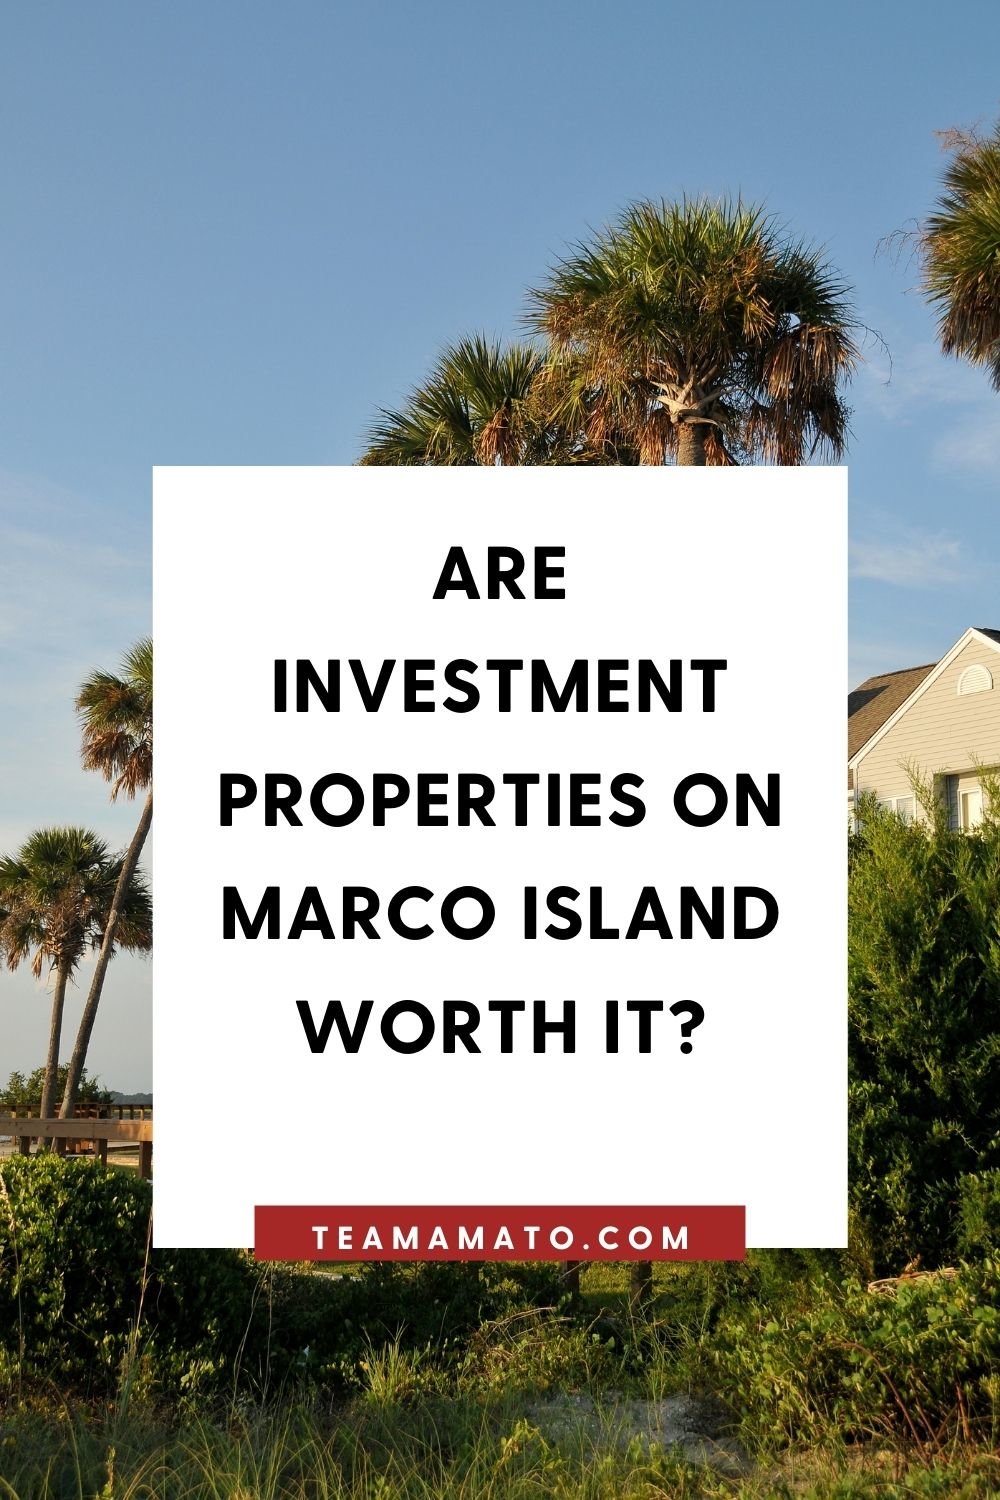 Are Investment Properties on Marco Island Worth it?